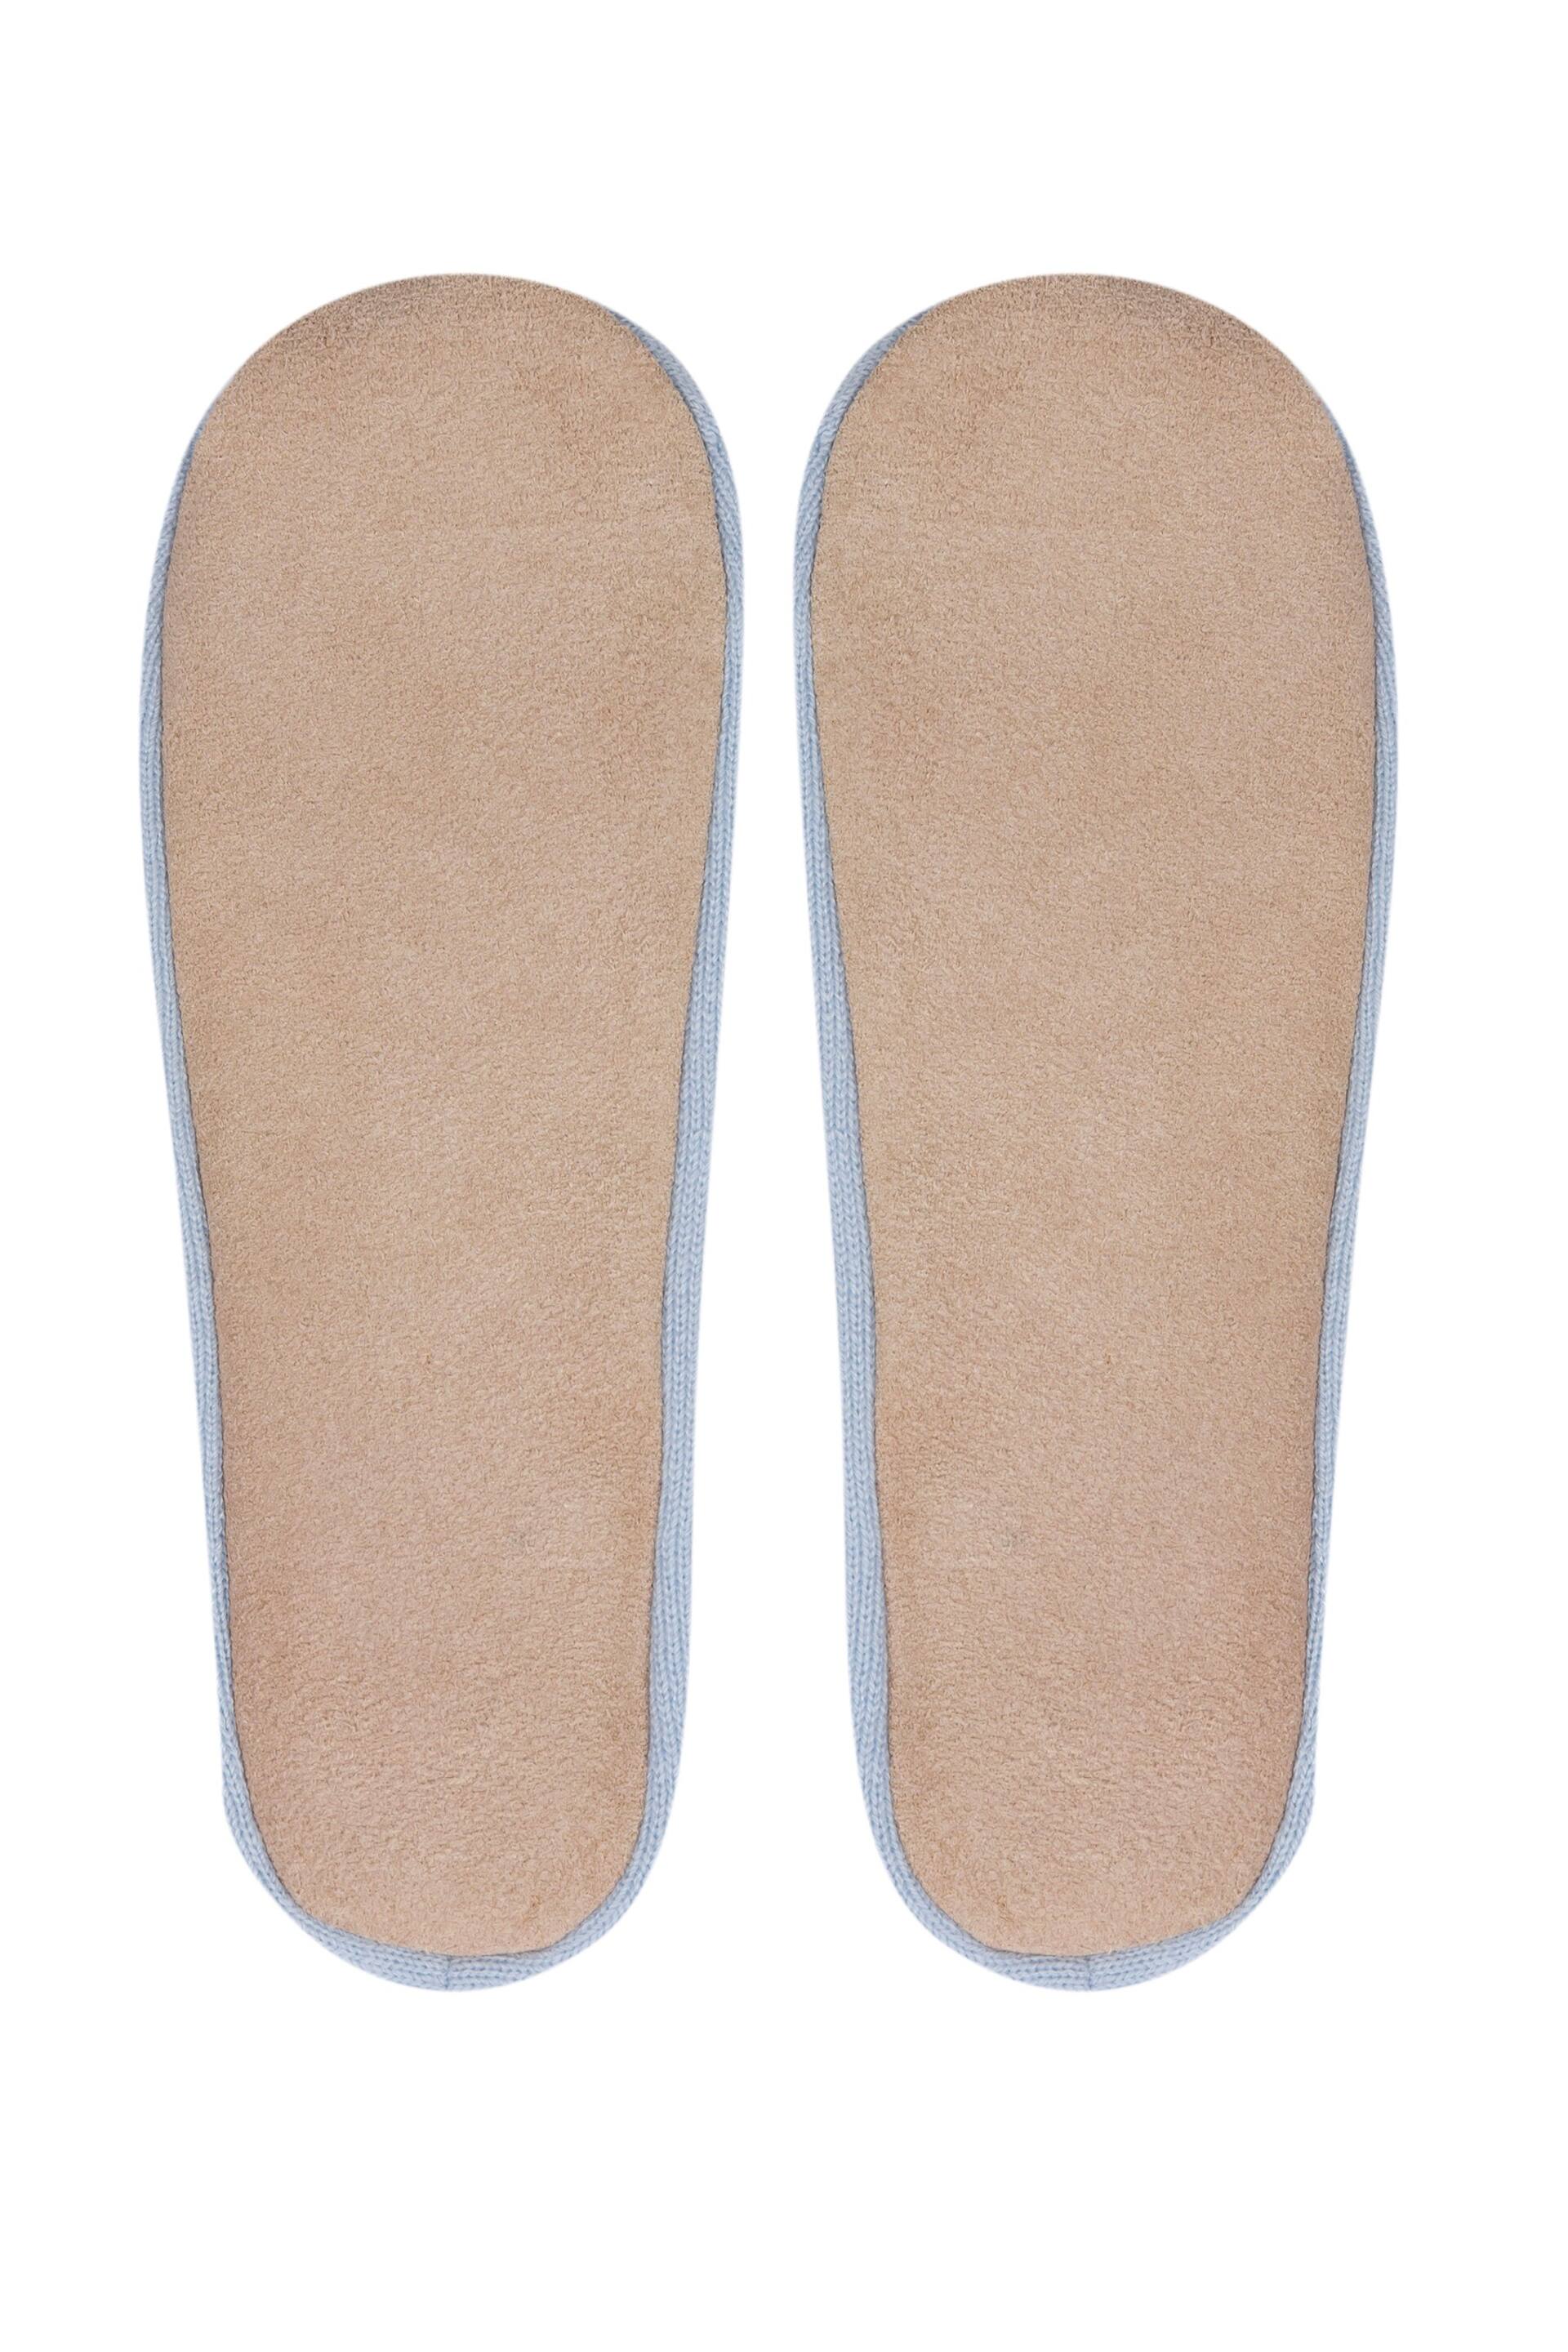 Pure Luxuries London Millom Cashmere & Merino Wool Slippers - Image 3 of 5